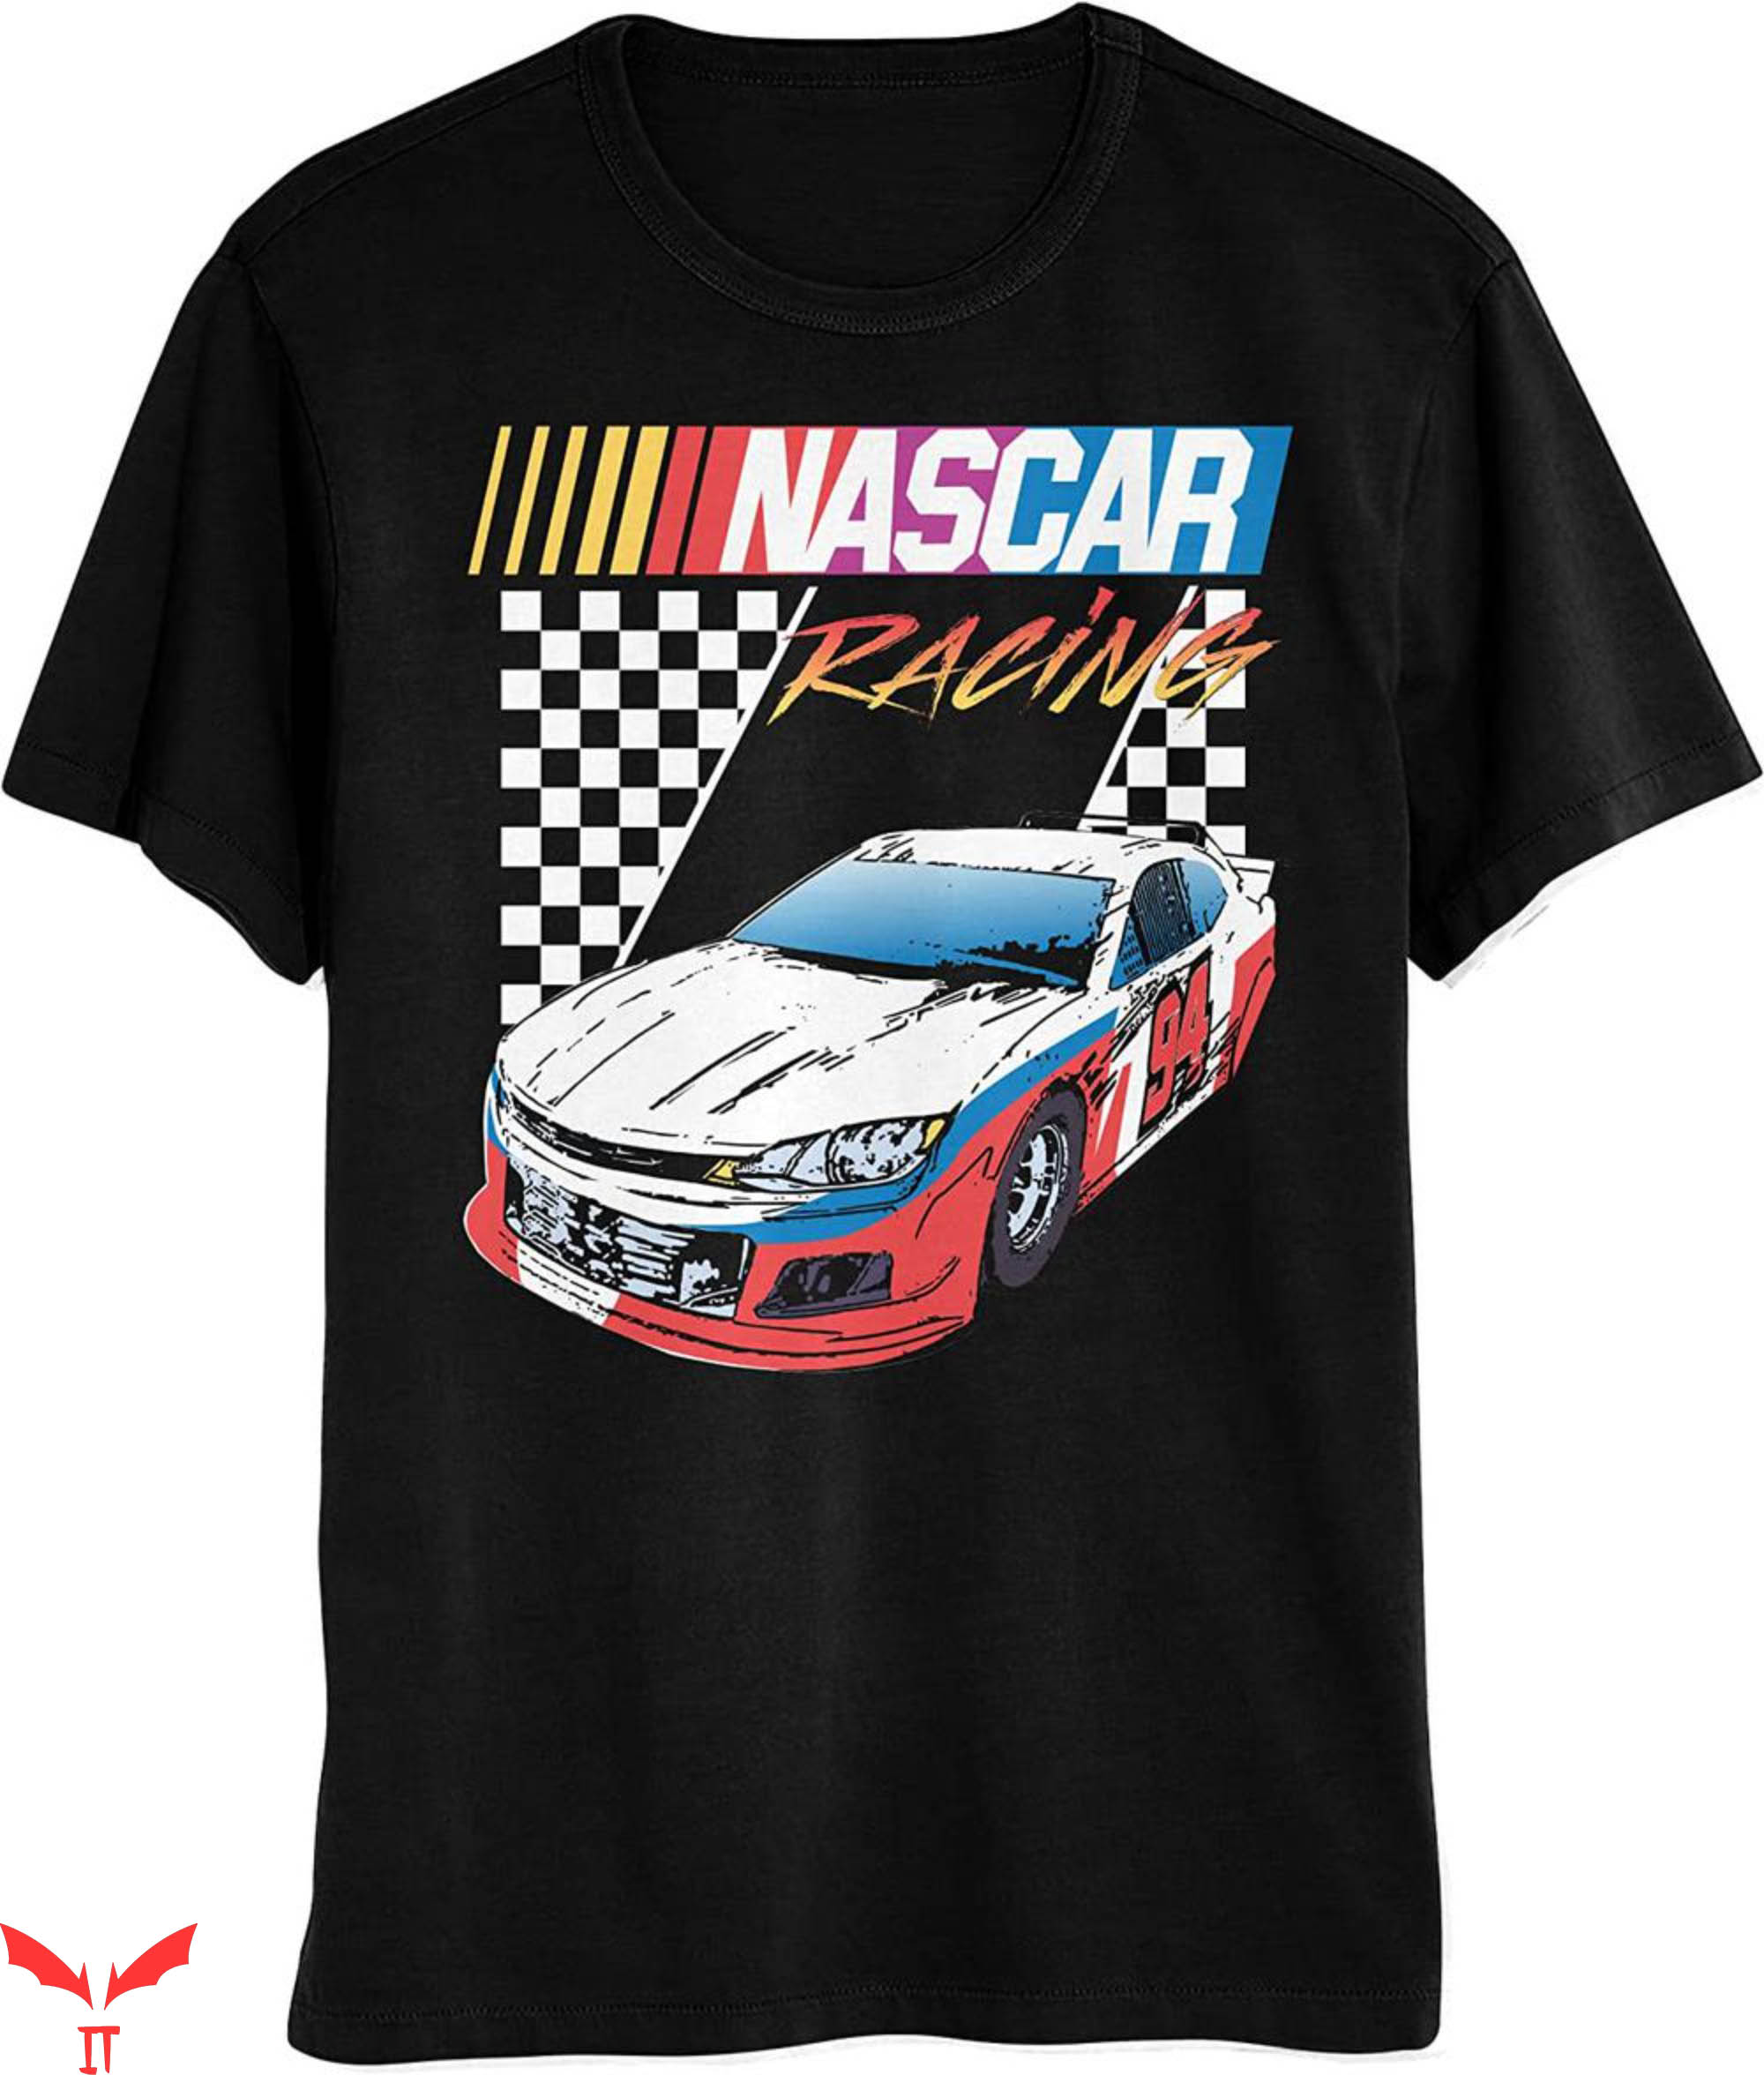 Vintage Nascar T-Shirt Red-White 94 Car Retro Racing Style